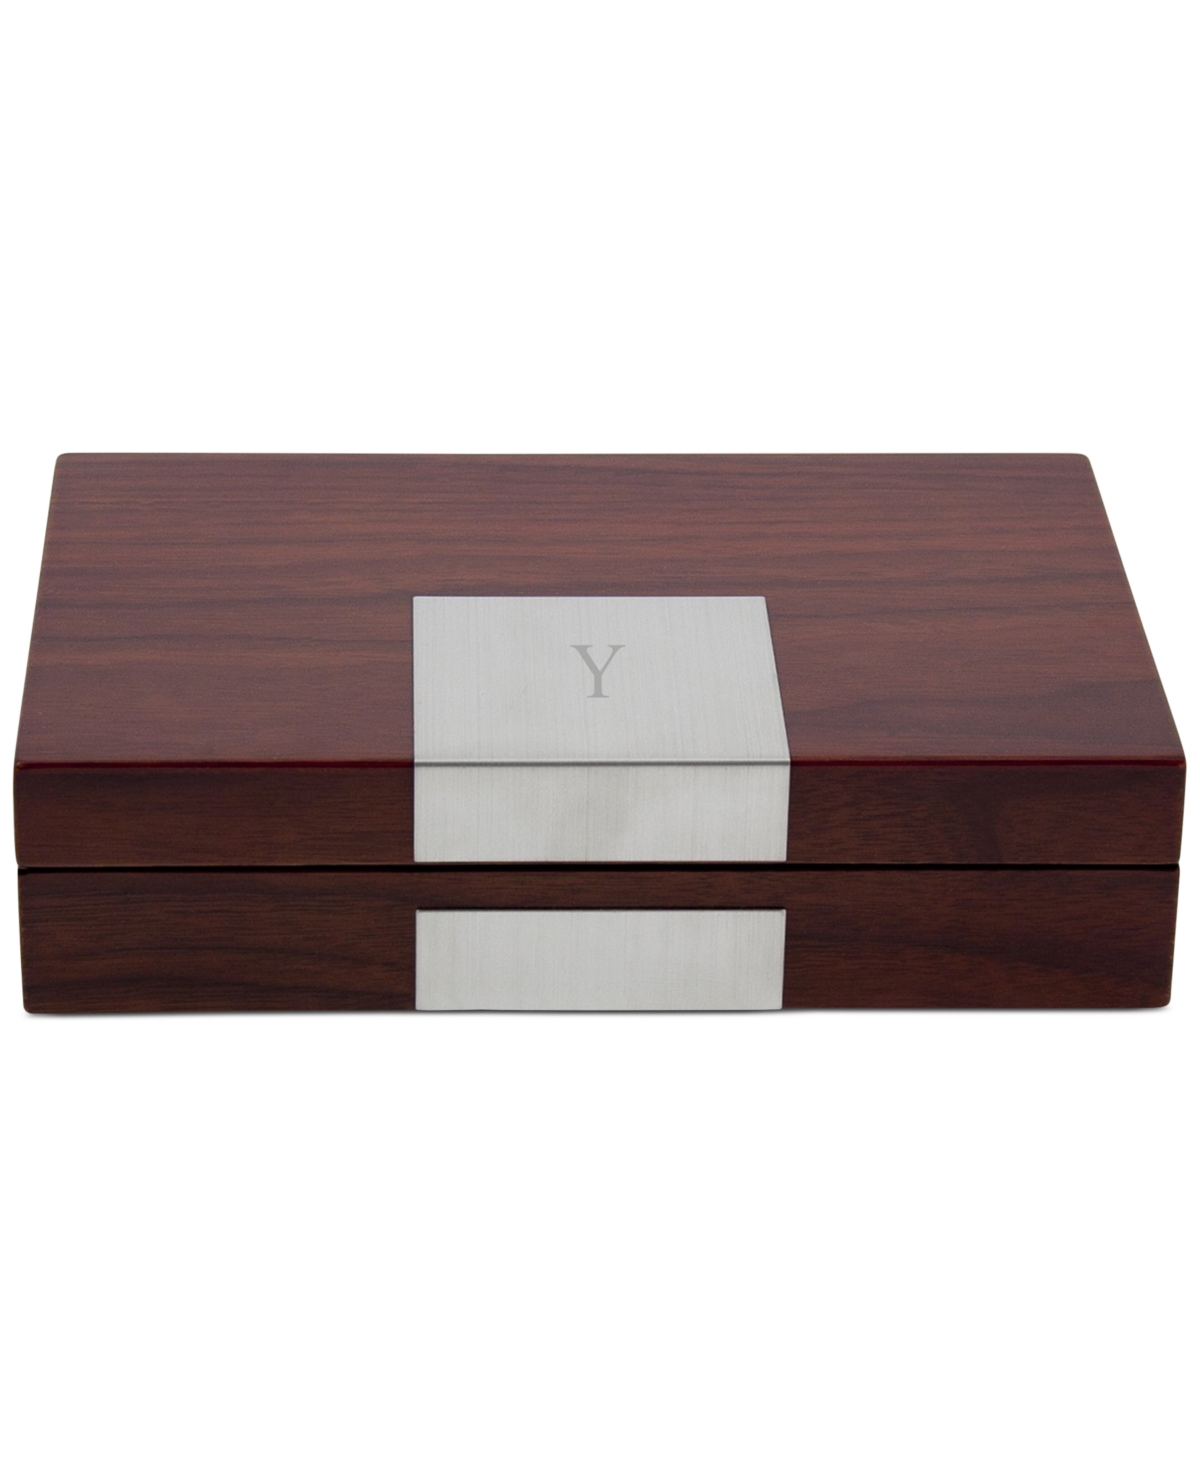 Lacquered "Natural Walnut" Wood Valet Box - Z